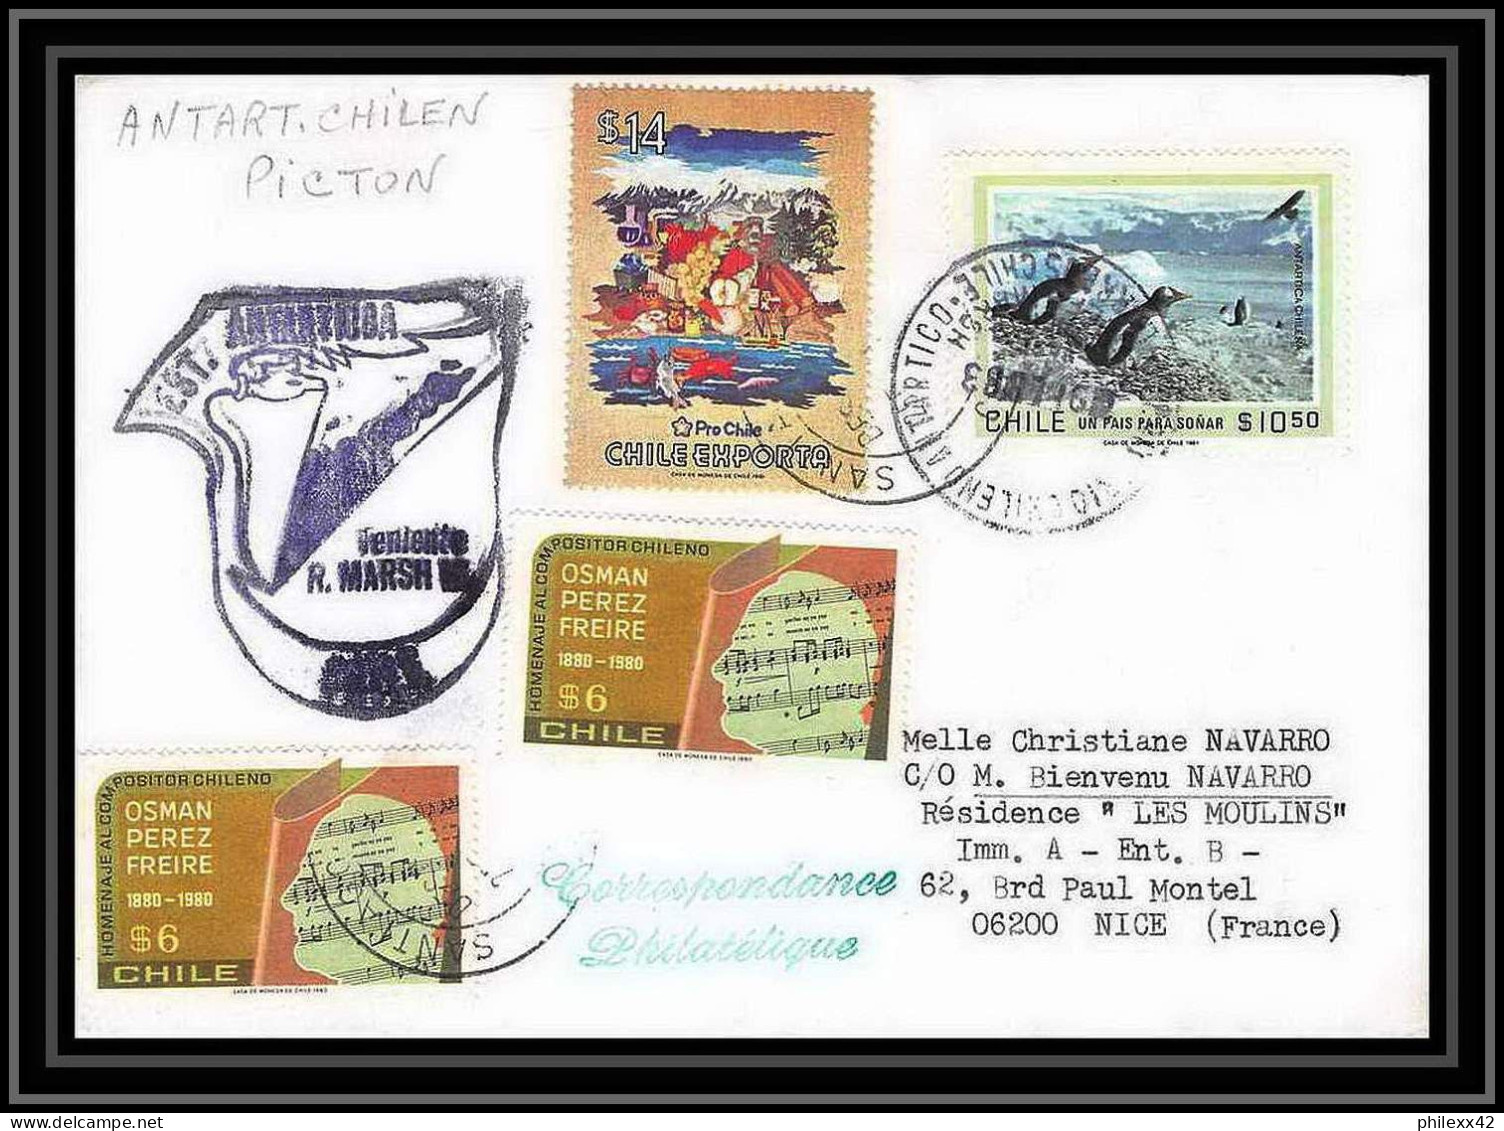 1916 Antarctic Chili (chile) Lettre (cover) Picton 9/2/1983  - Research Stations